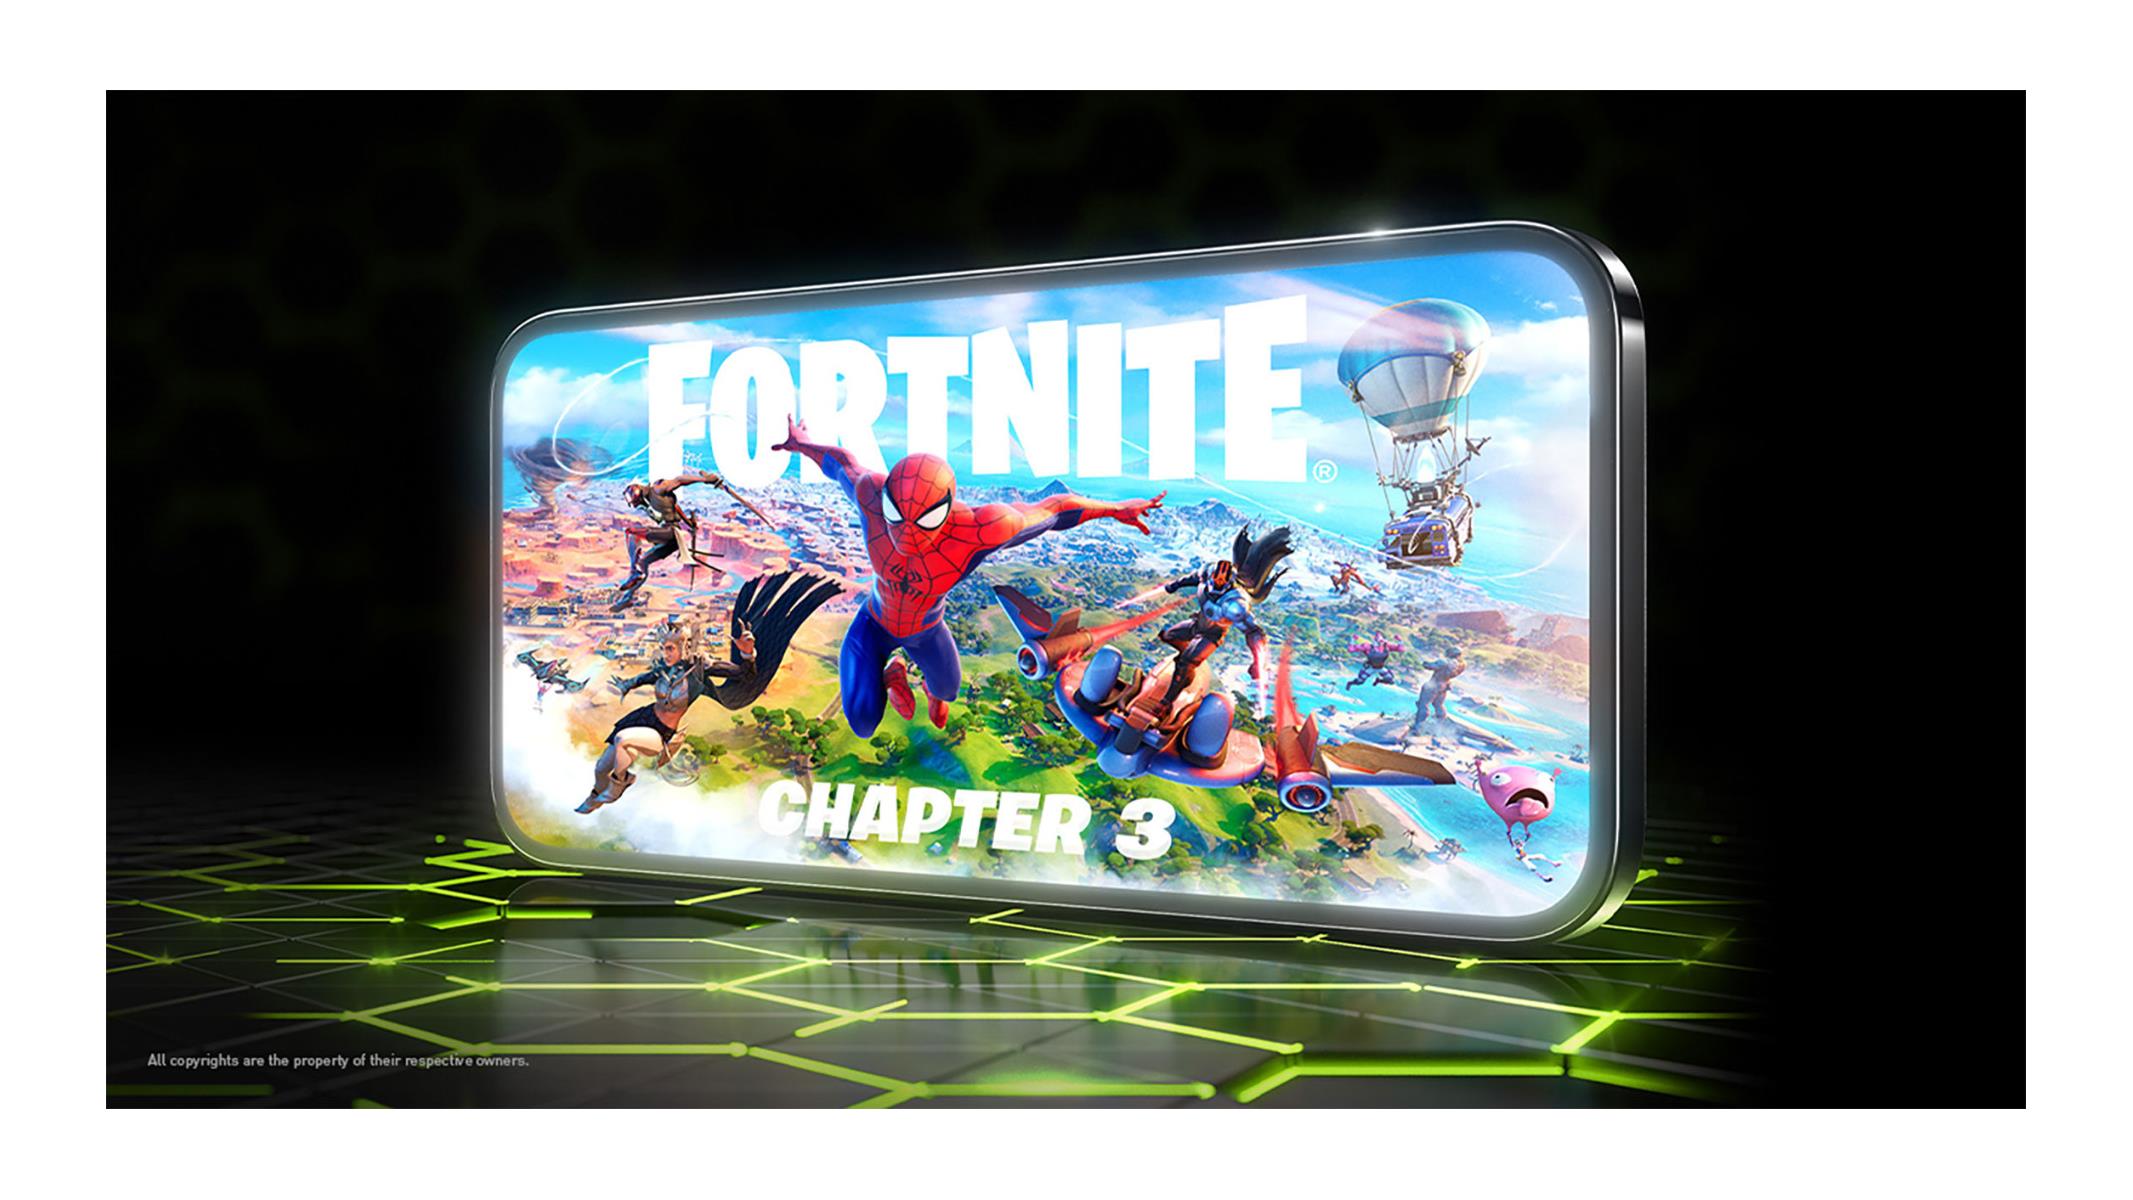 GeForce Now arrives on iPhone, iPad and brings Fortnite too - 9to5Mac